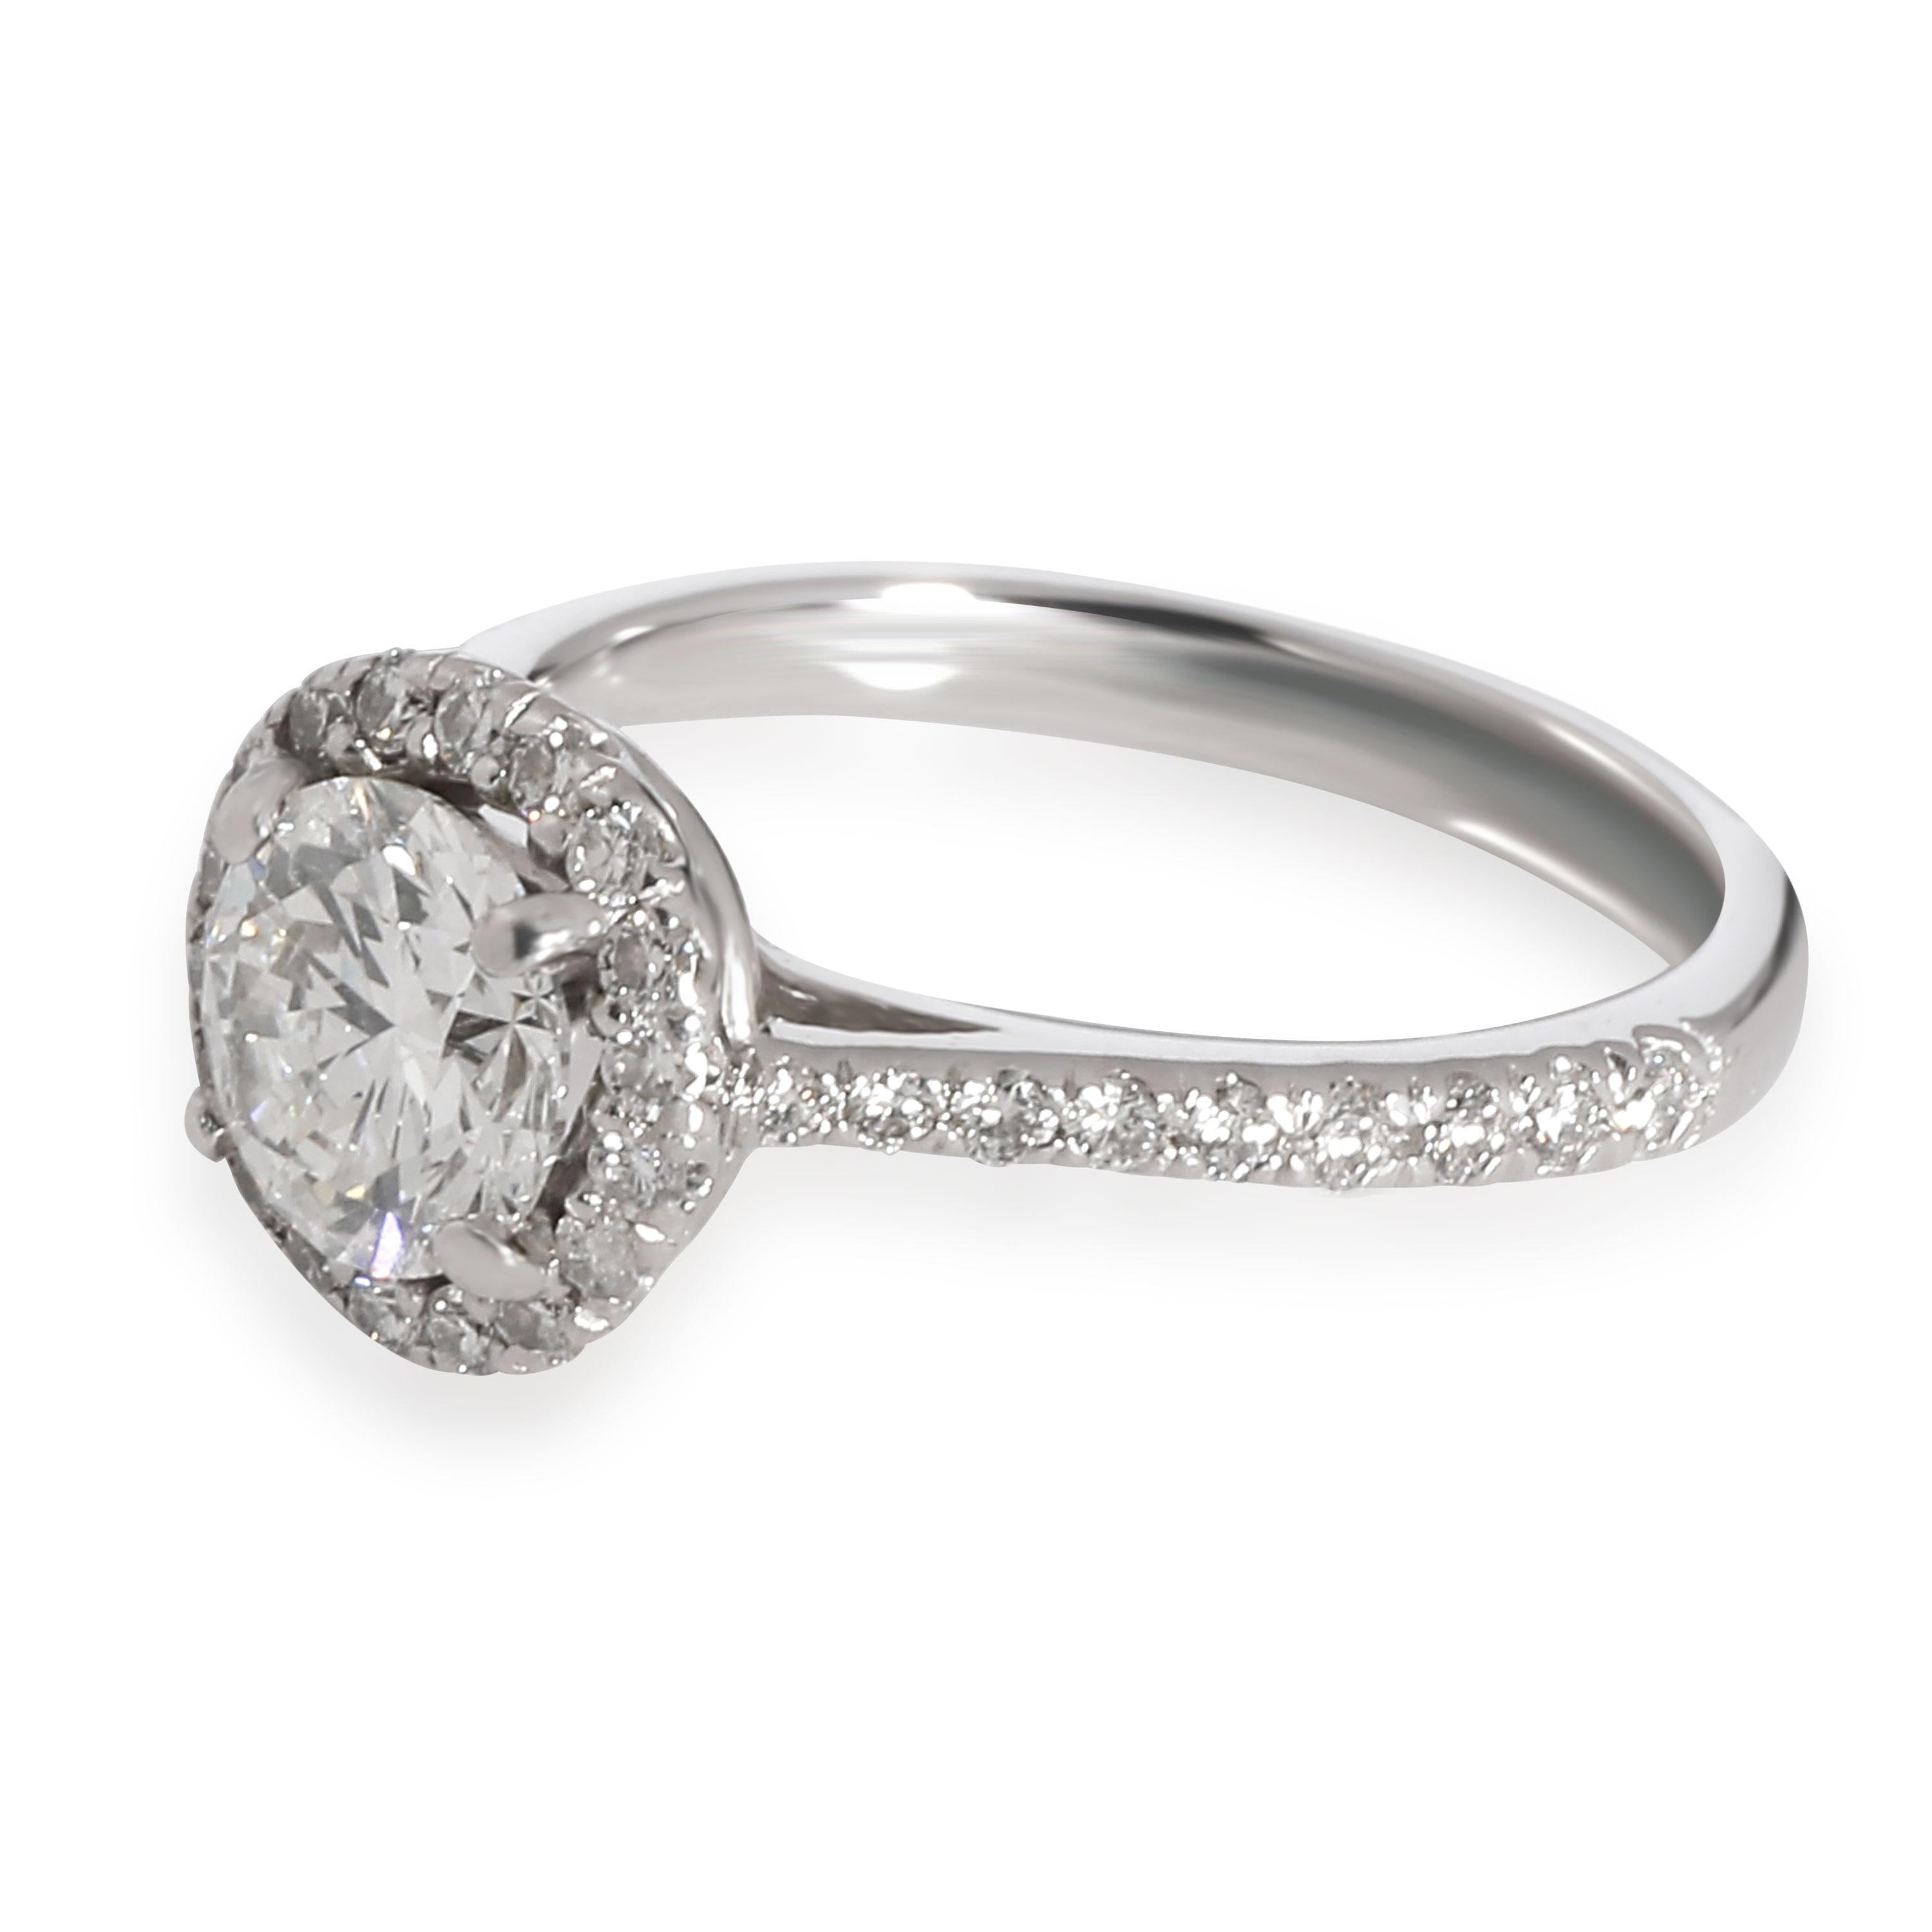 Modern Halo Diamond Engagement Ring in Platinum EGL Certified F SI2 1.05 CTW